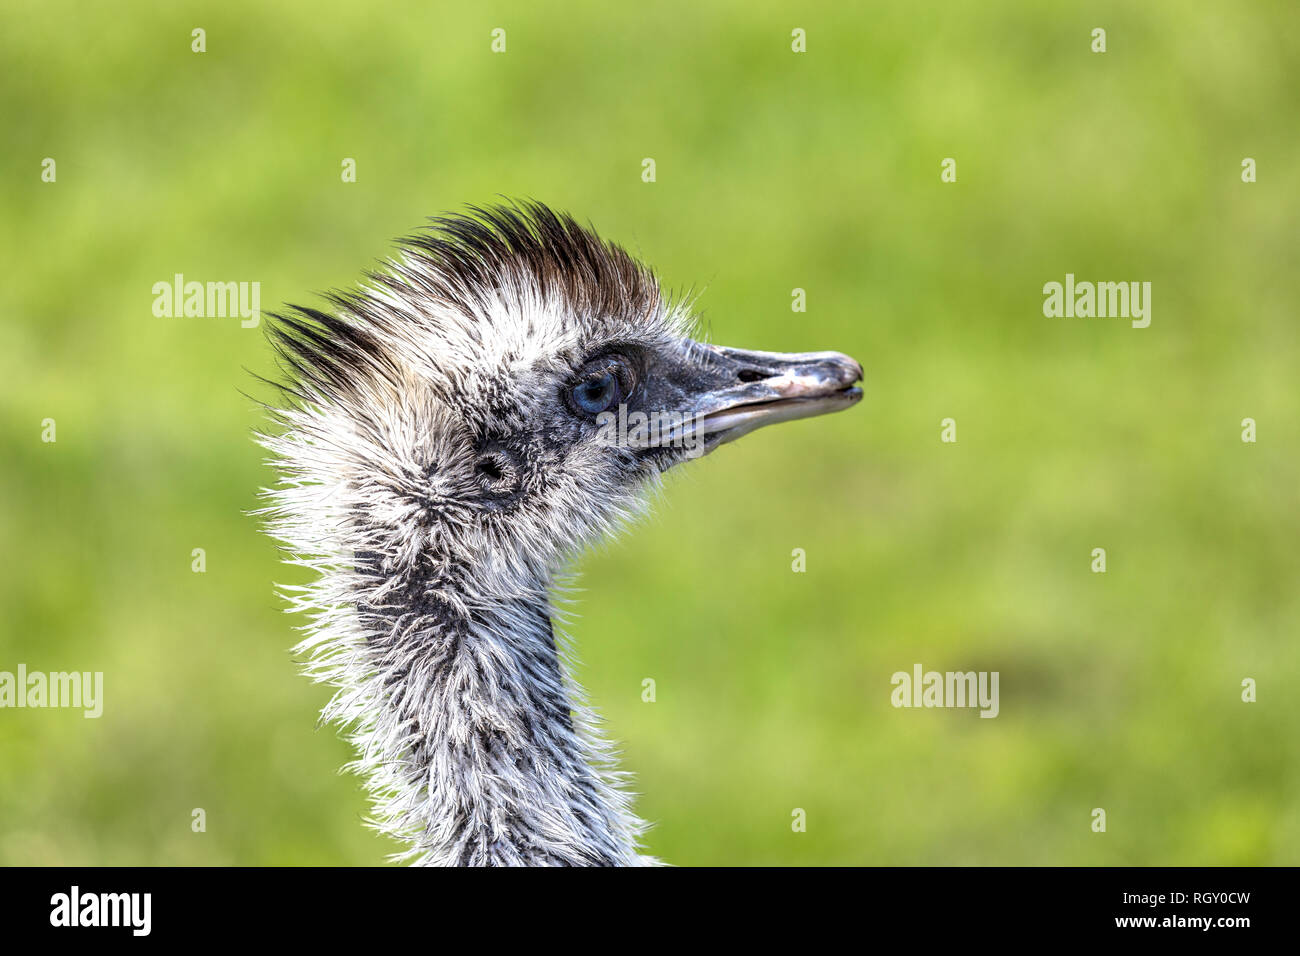 Close-up profile portrait of an Emu Bird on a green background at the zoo Stock Photo